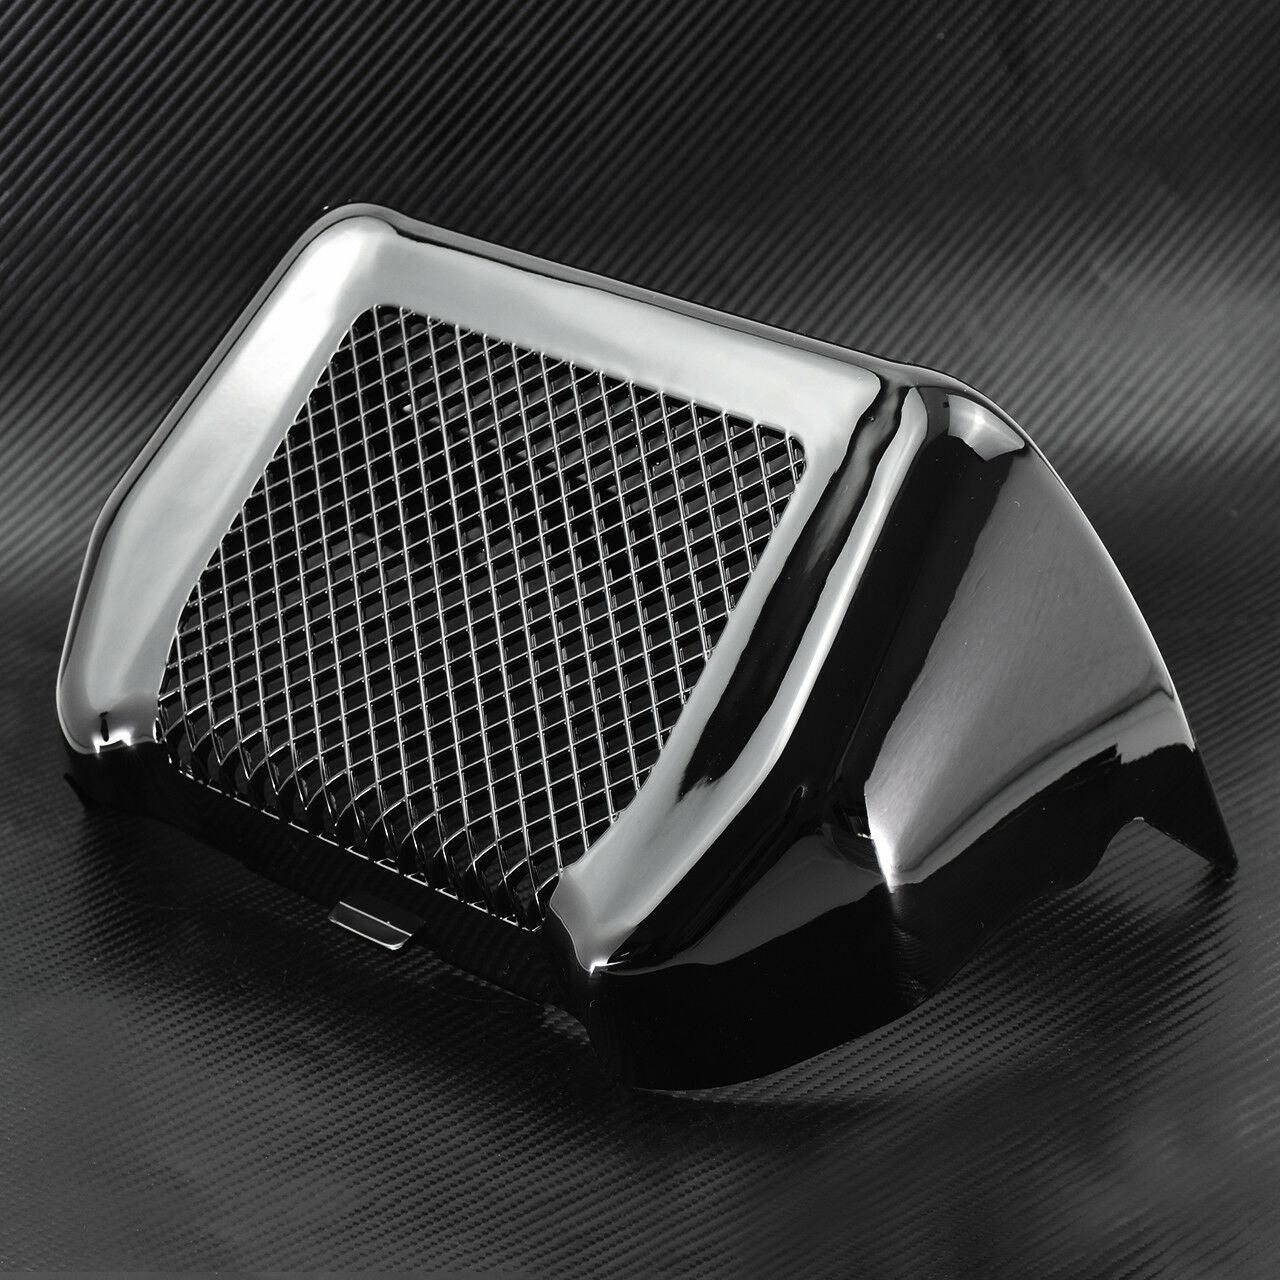 Oil Cooler Cover Kit Fit For Harley Touring FLHRC FLHX FLHXS FLTRX FLTRXS 17-20 - Moto Life Products